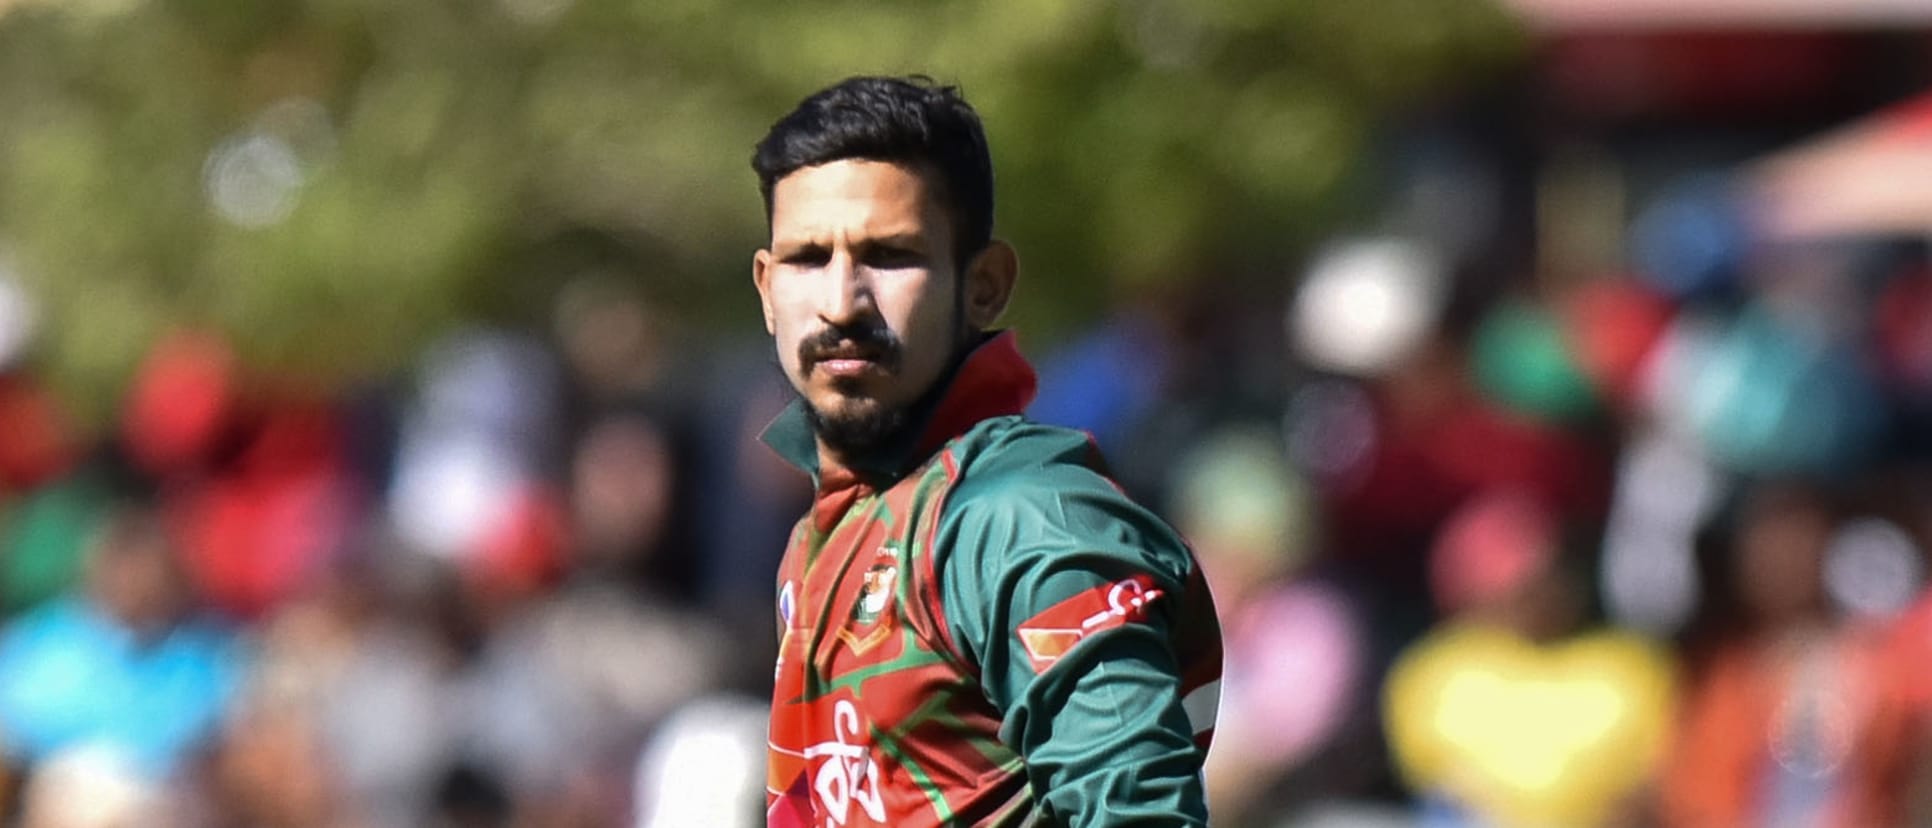 Bangladesh All-Rounder Nasir Hossain Banned From All Forms Of Cricket For 2 Years